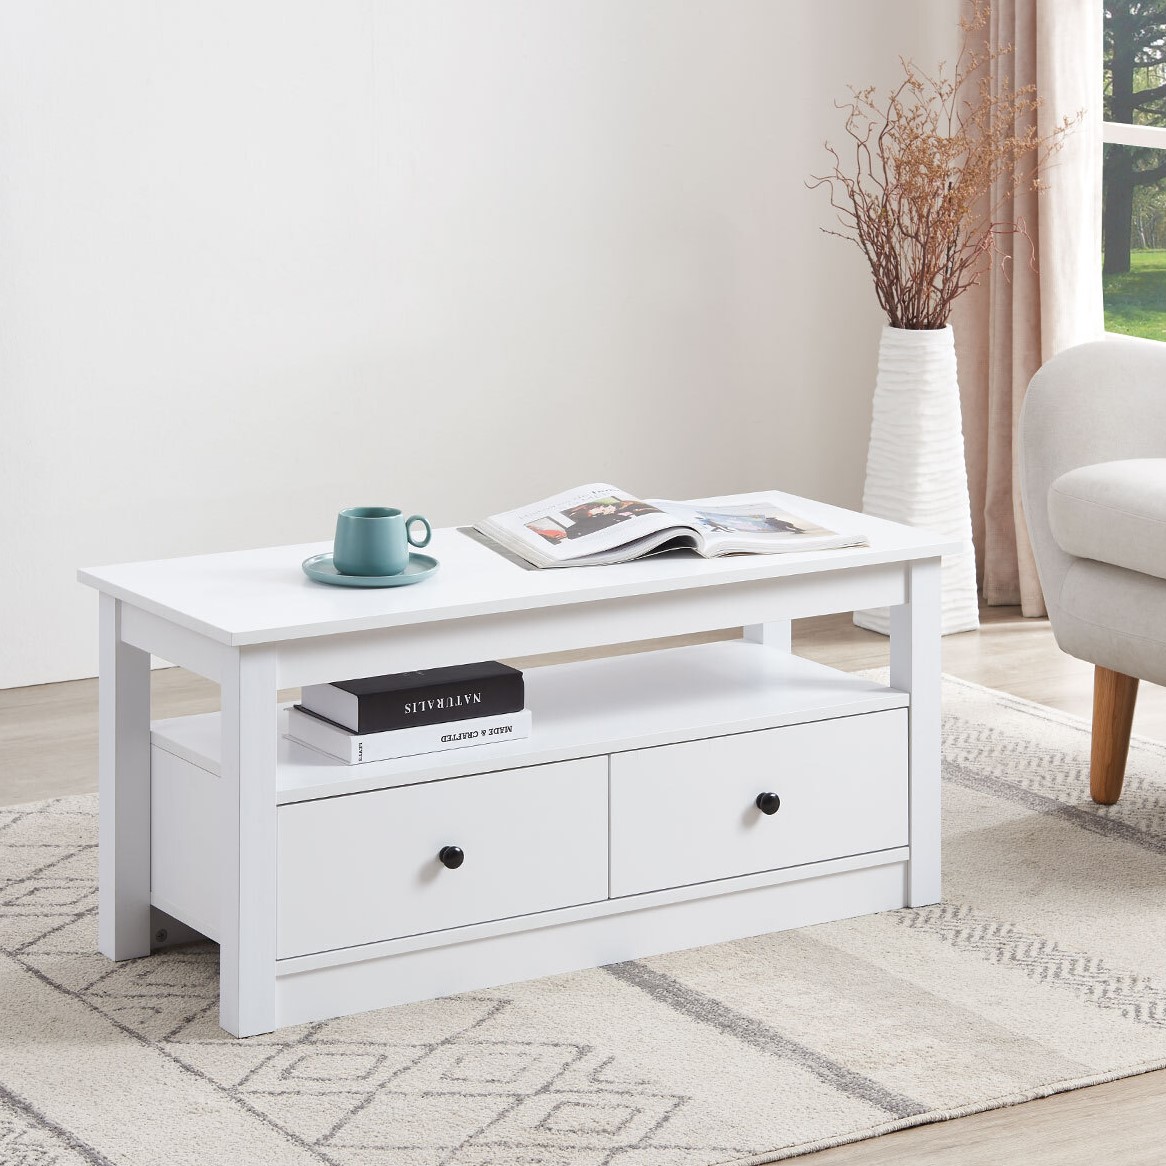 Windsor 2 Drawer White Coffee Table Image 5